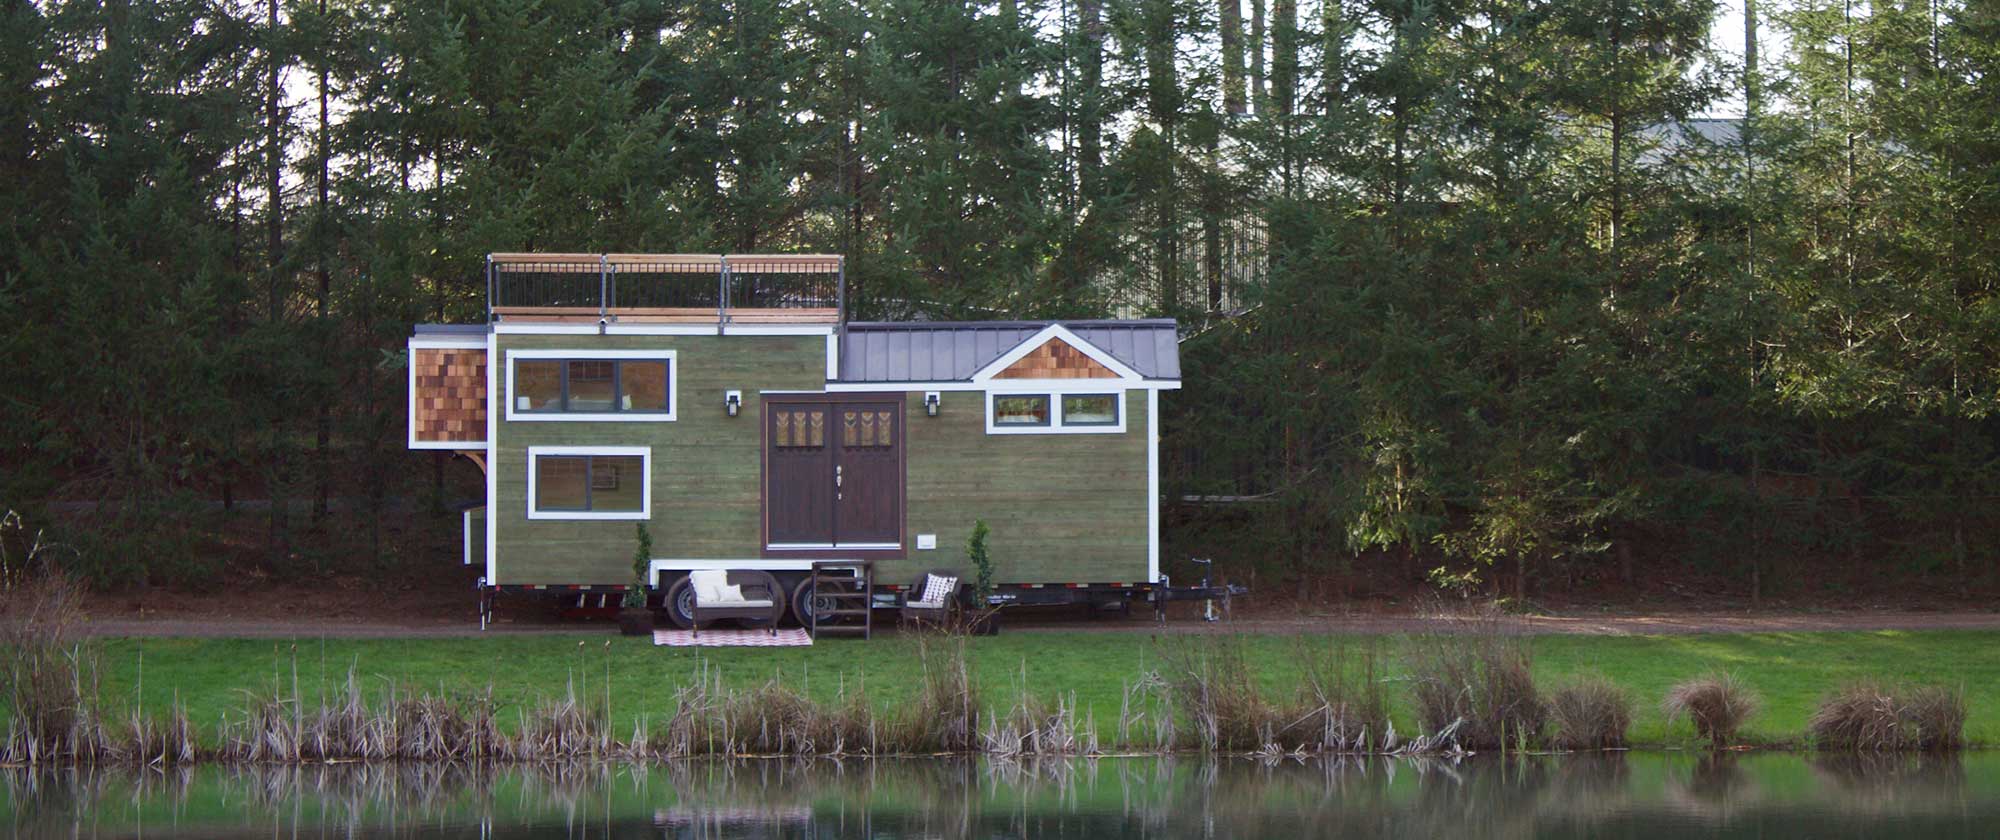 A lovely craftsman tiny house situated by a lake